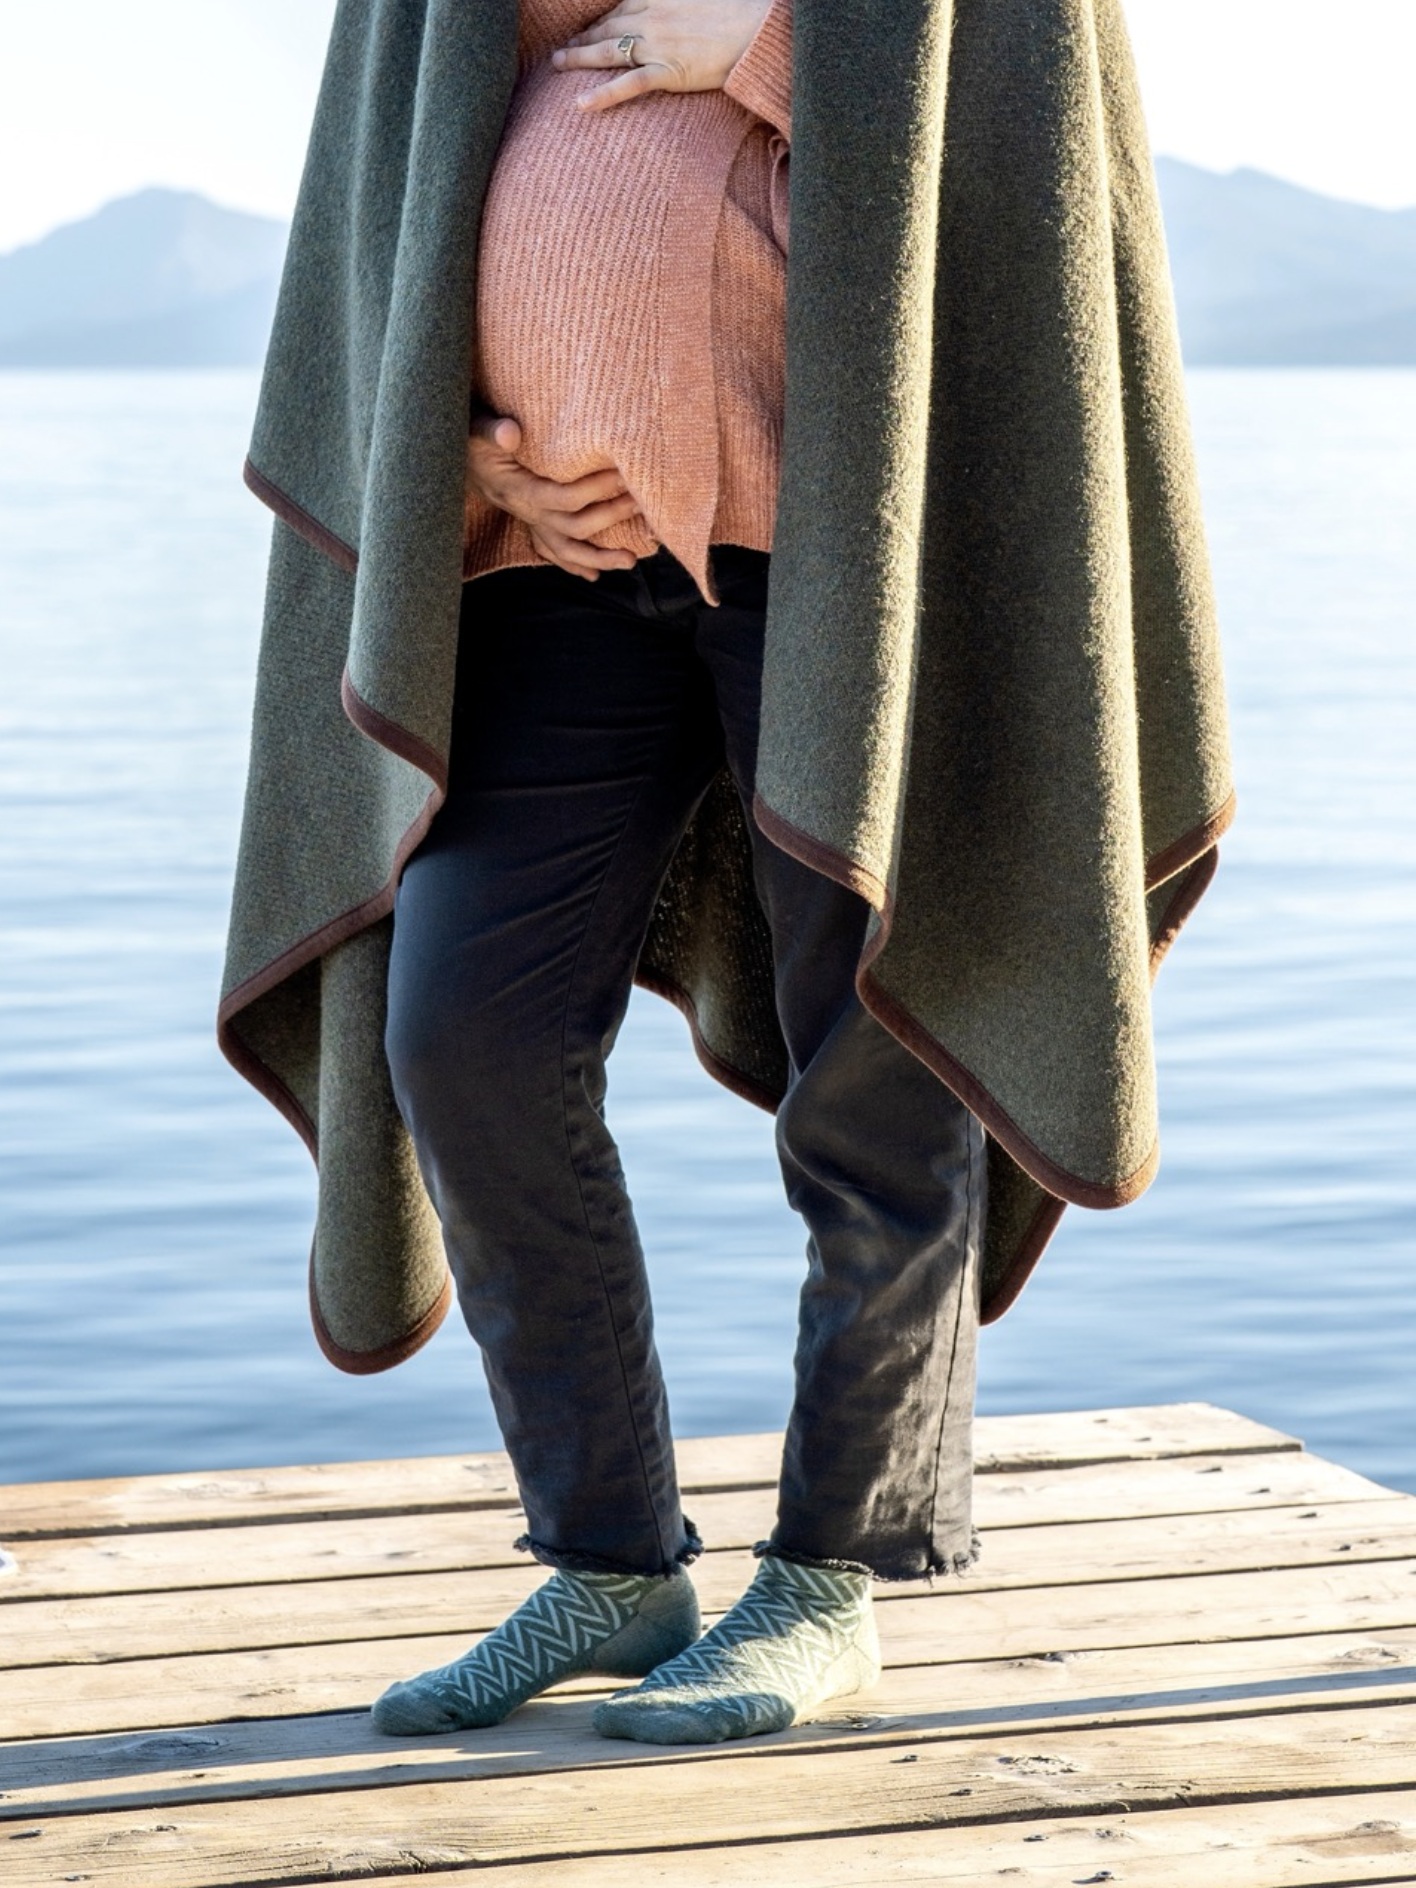 A person standing on a wooden dock by the water, wrapped in a green blanket and wearing black pants and patterned compression socks.